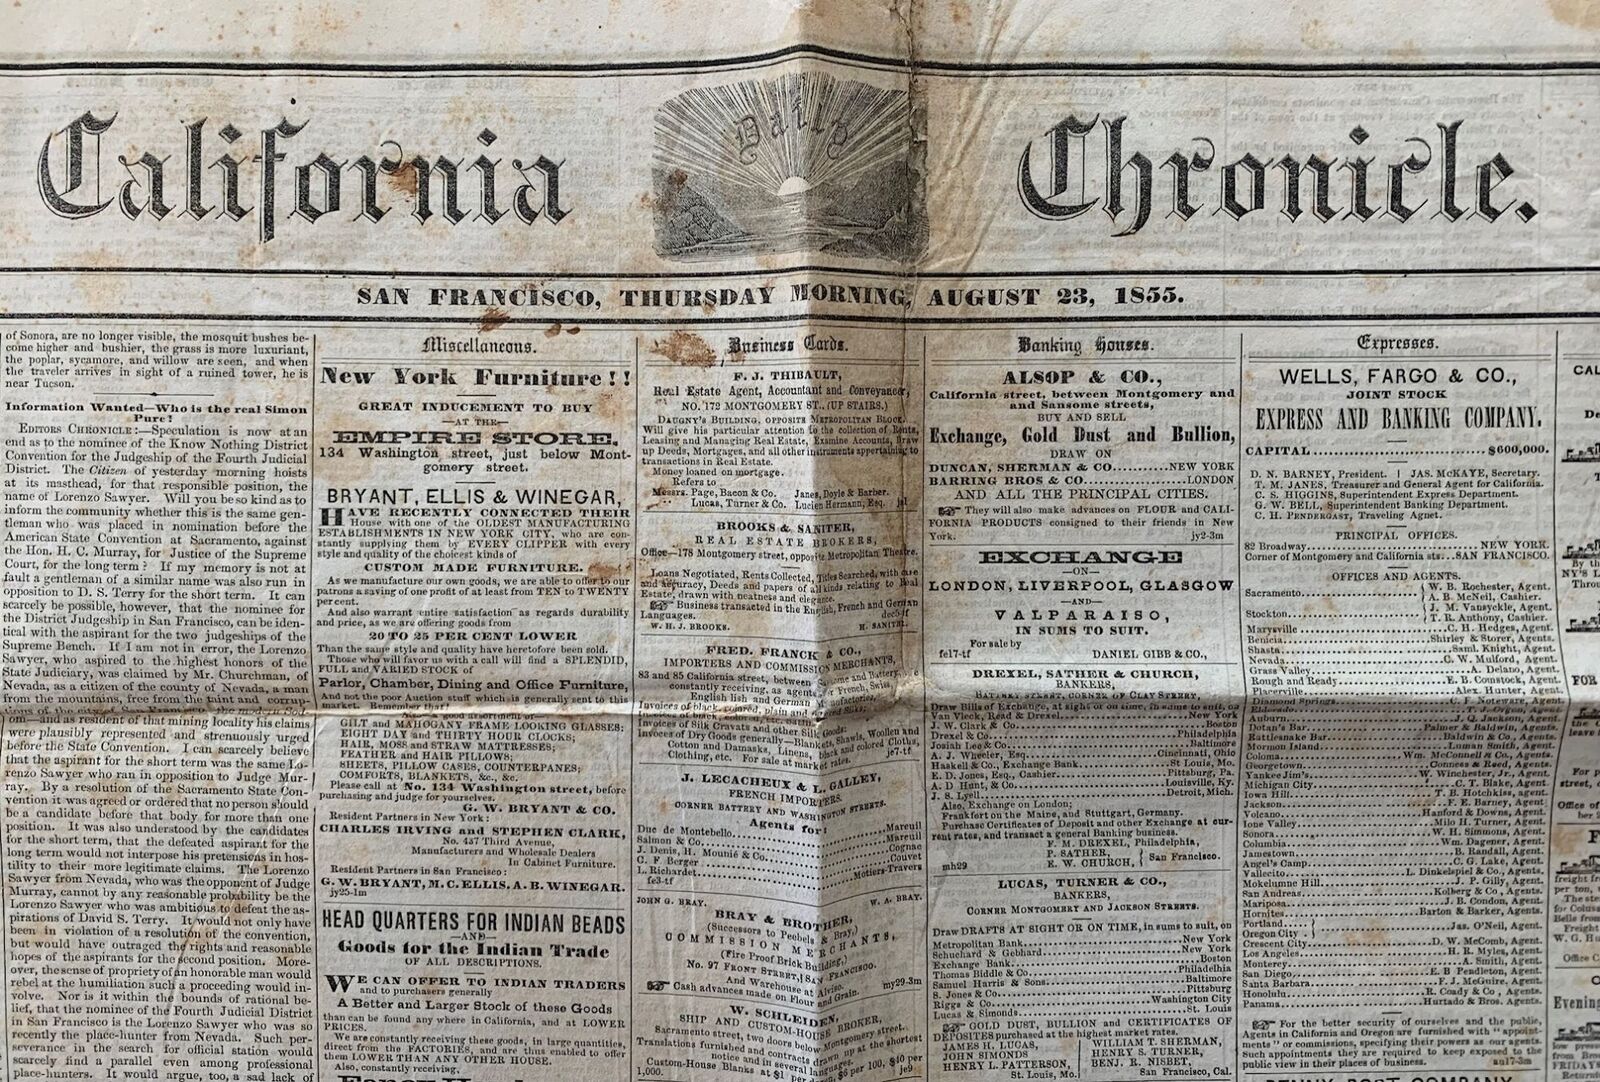 Frank Soule / Daily California Chronicle Vol IV No 81 August 23 1855